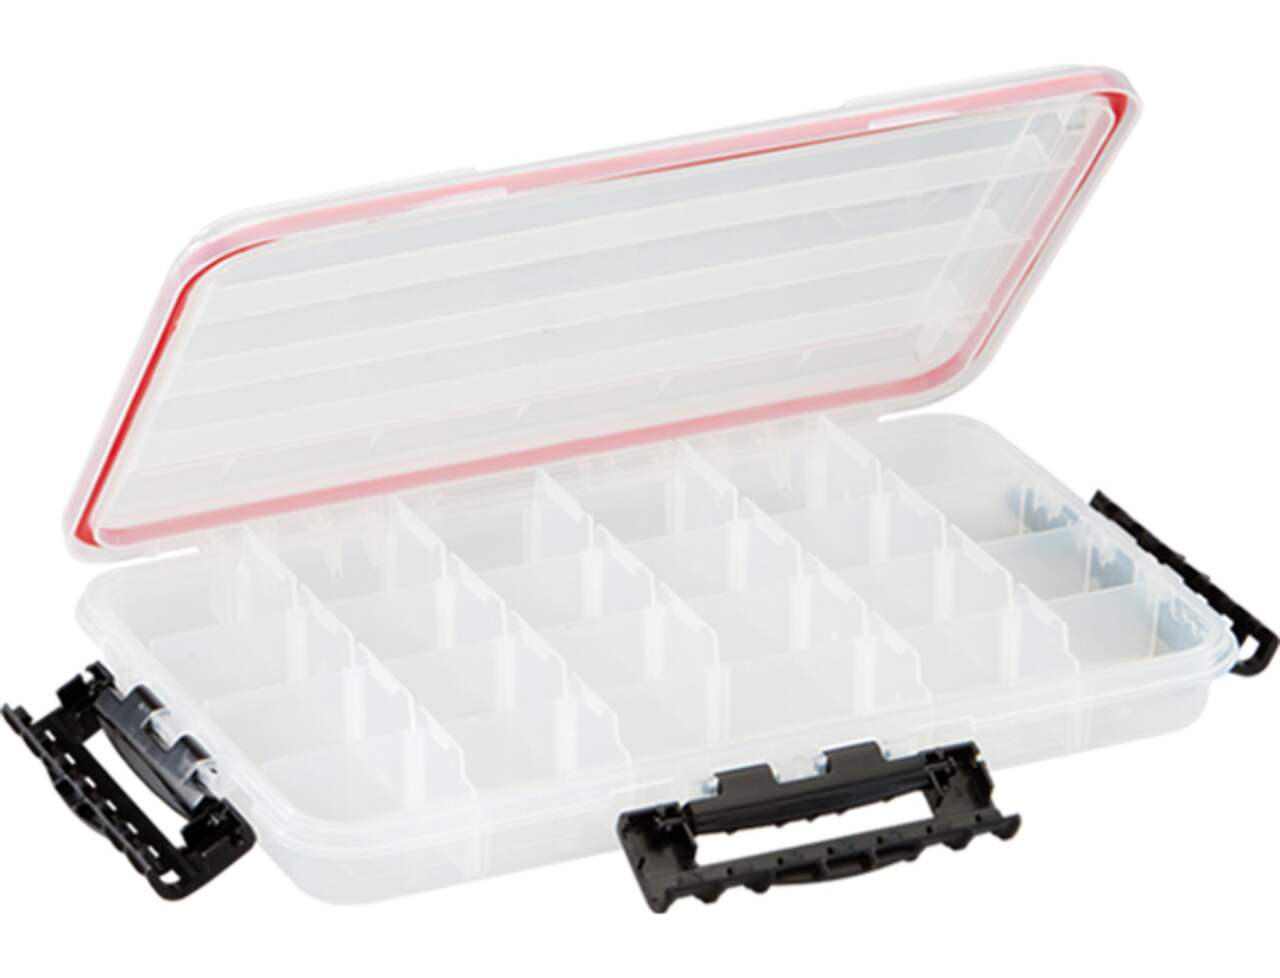 Buy plano tackle box 3700 Online in Bermuda at Low Prices at